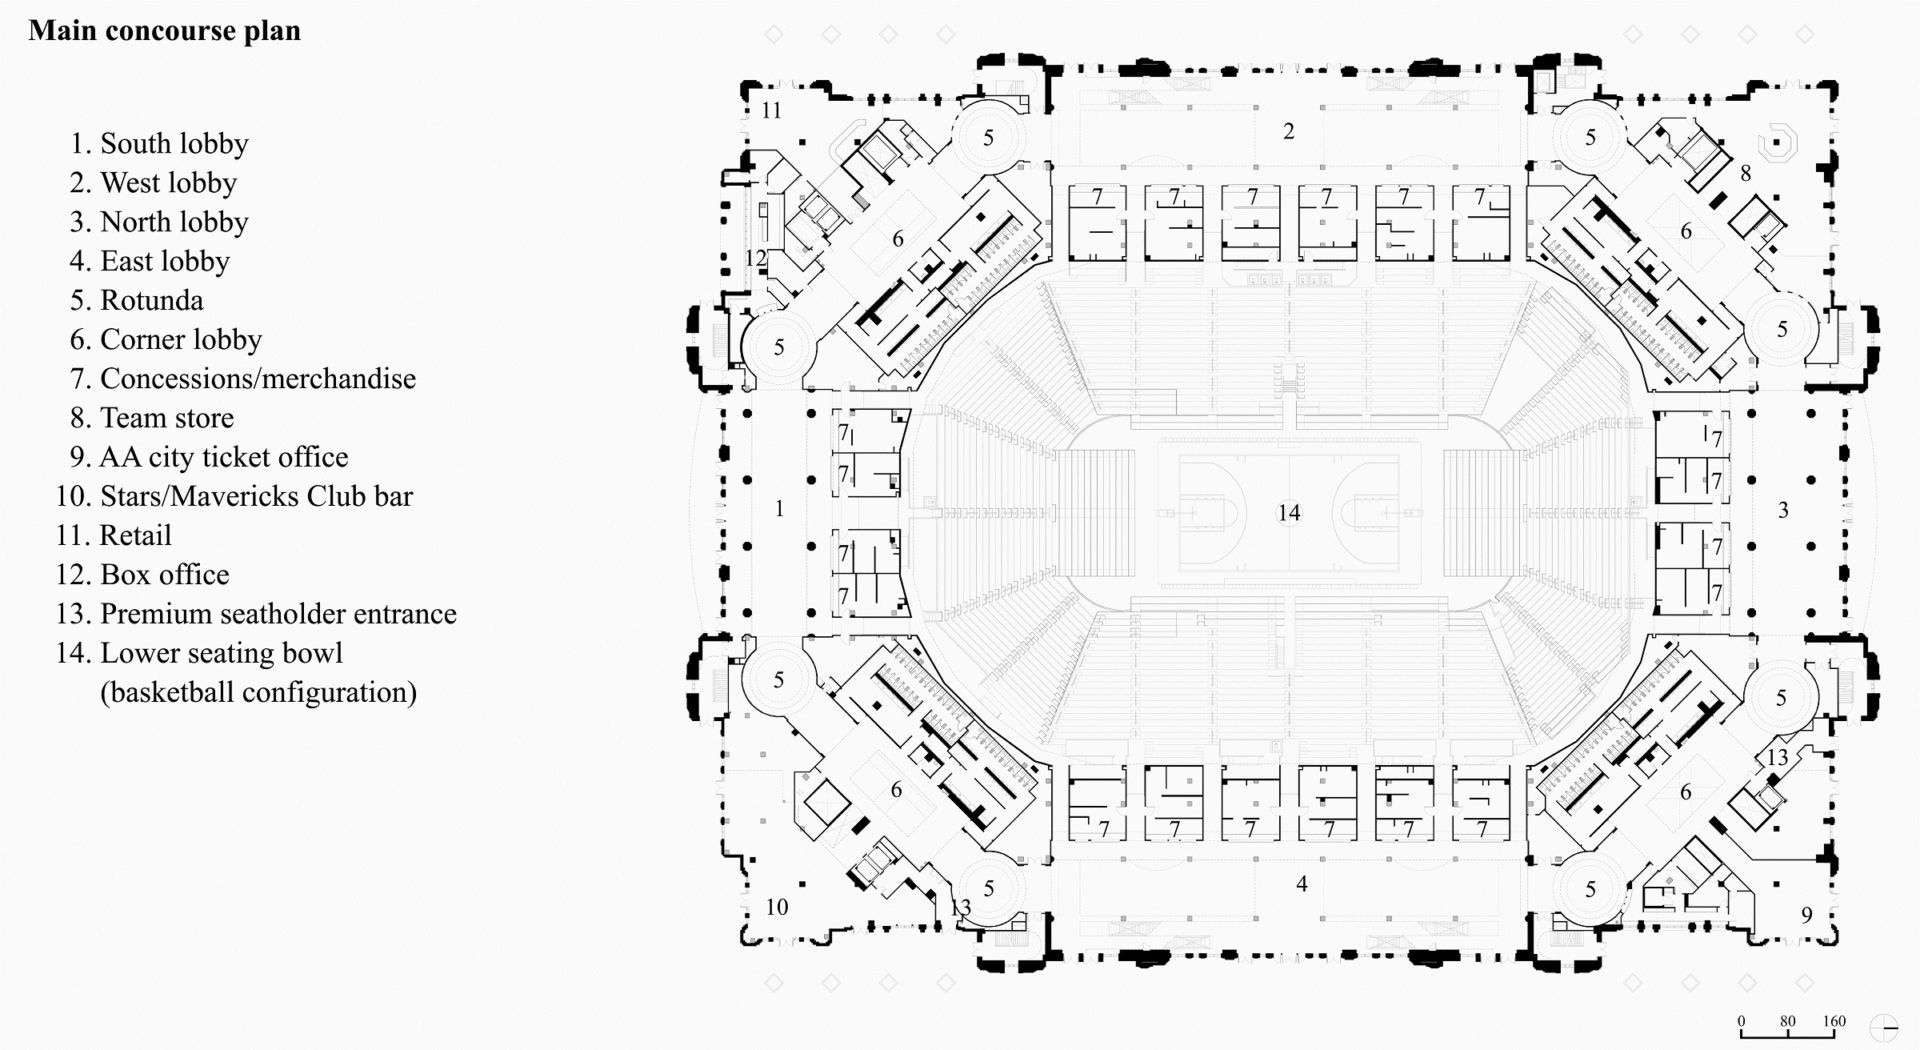 american airlines arena seating chart concert